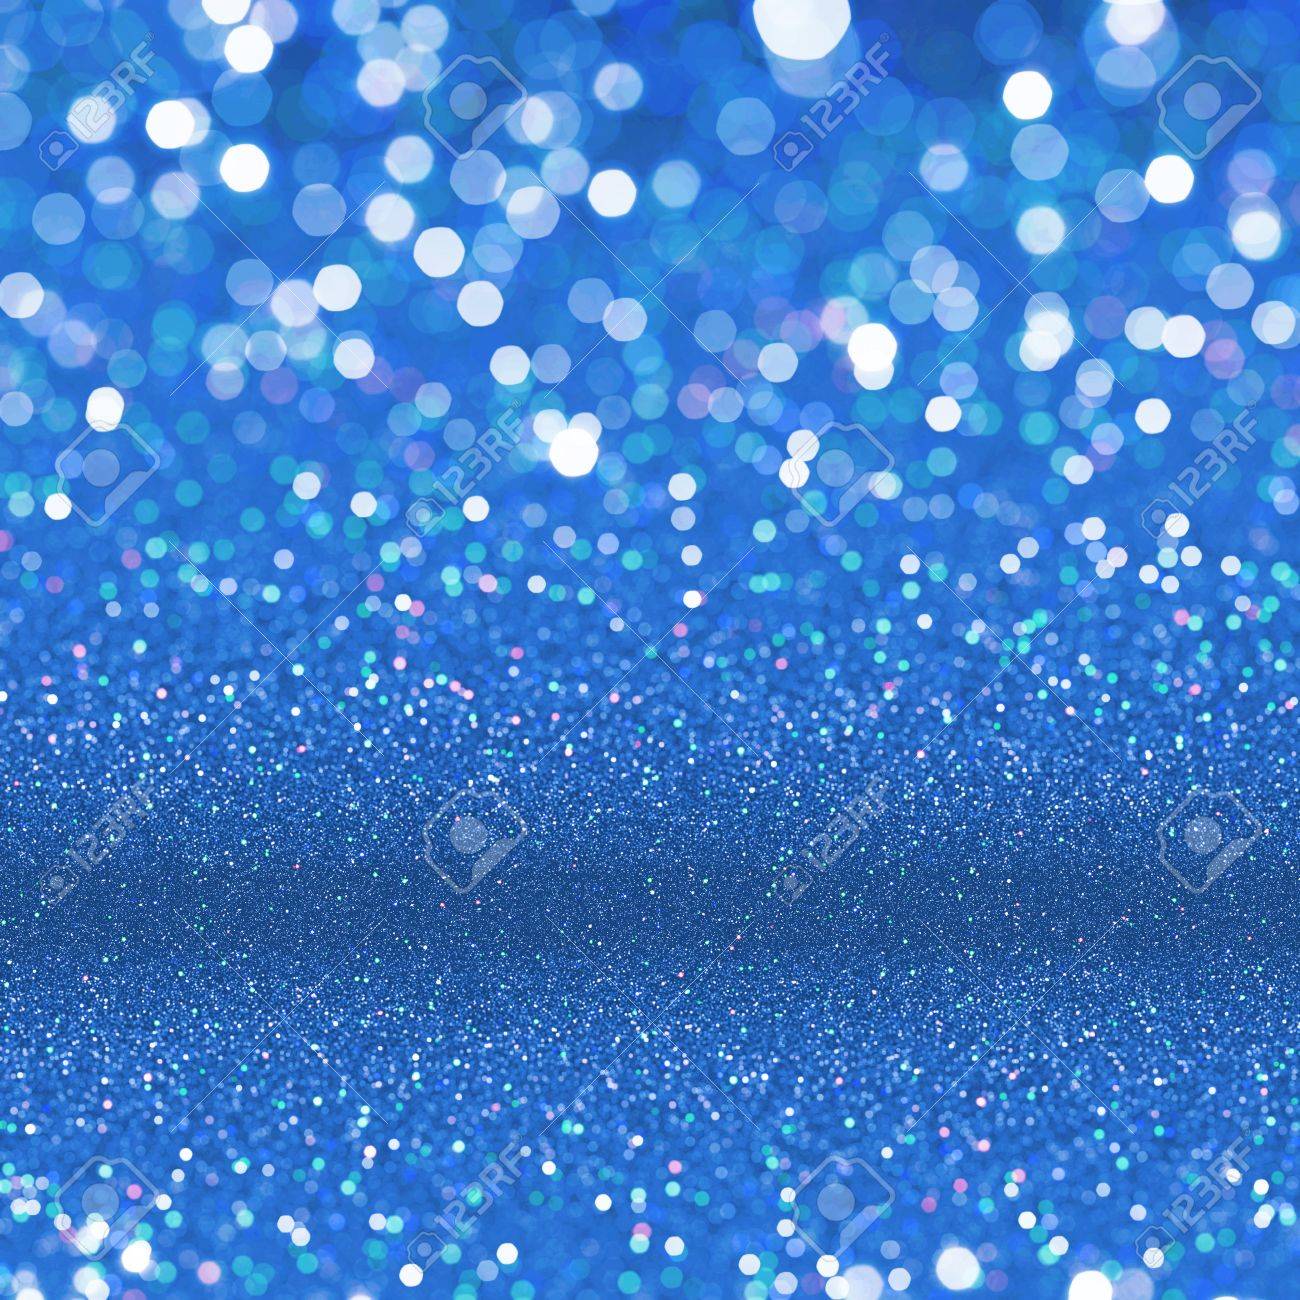 Abstract Blue Shining Glitter Texture Background Stock Photo